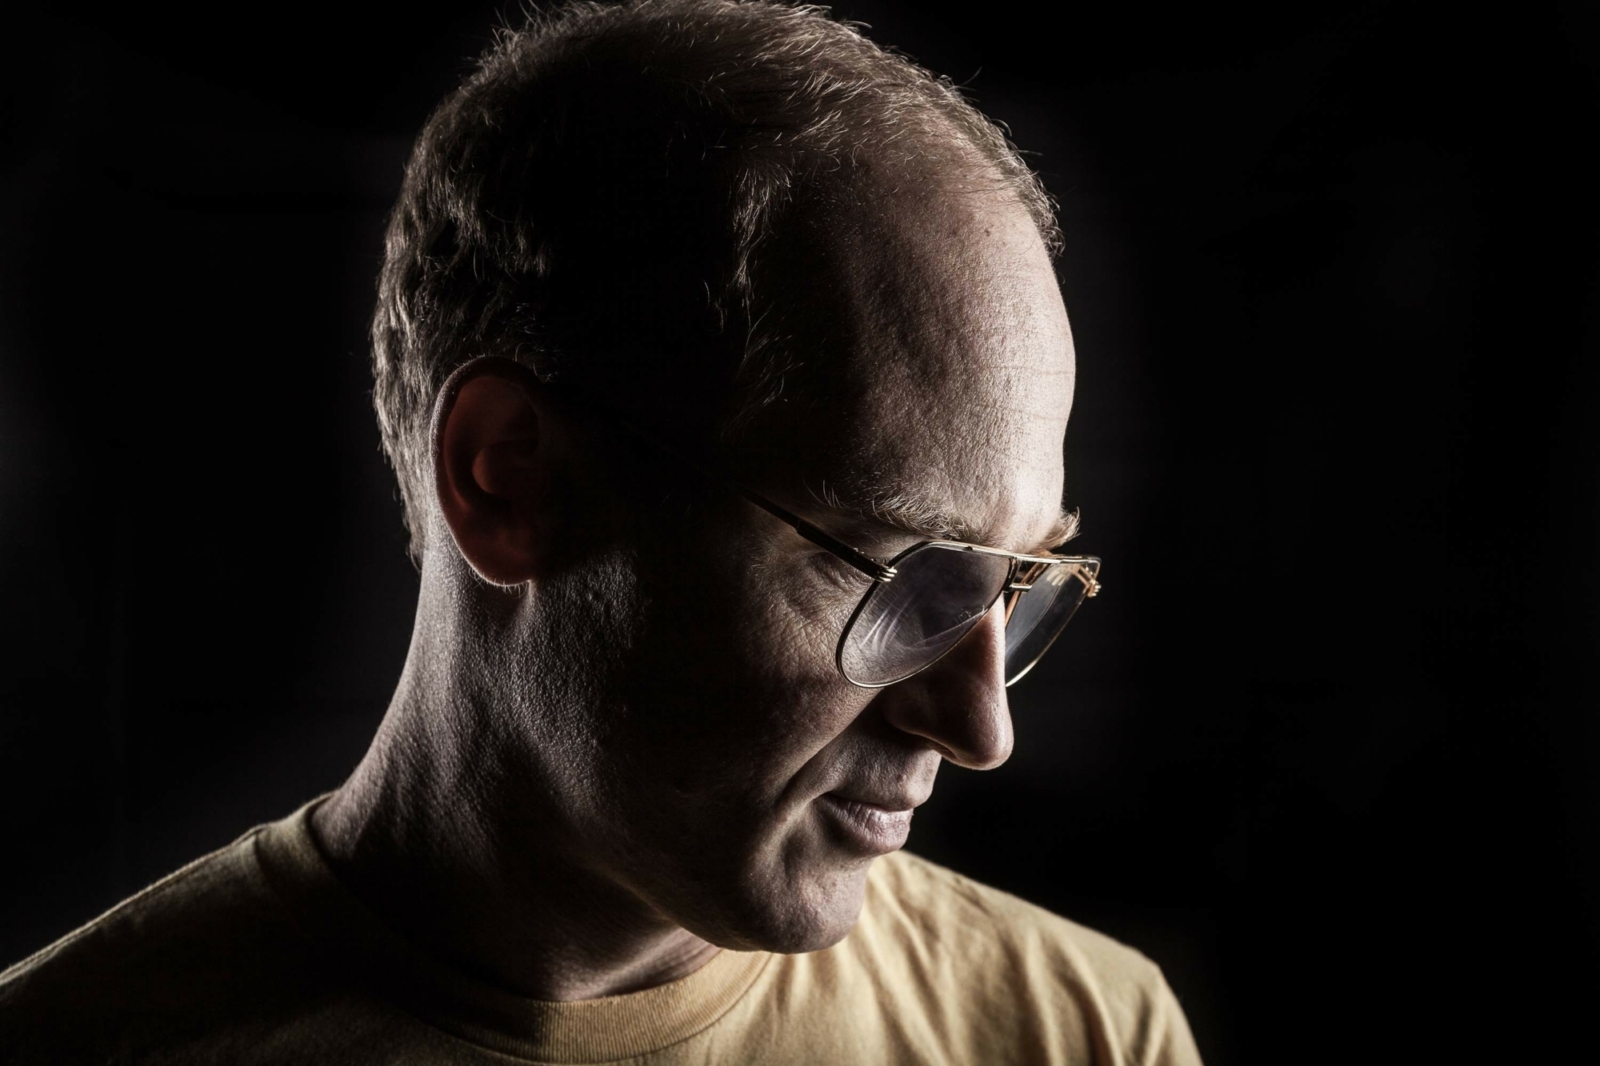 Dan Snaith shares new music as Daphni, in the shape of shimmering new 'Sizzling' EP